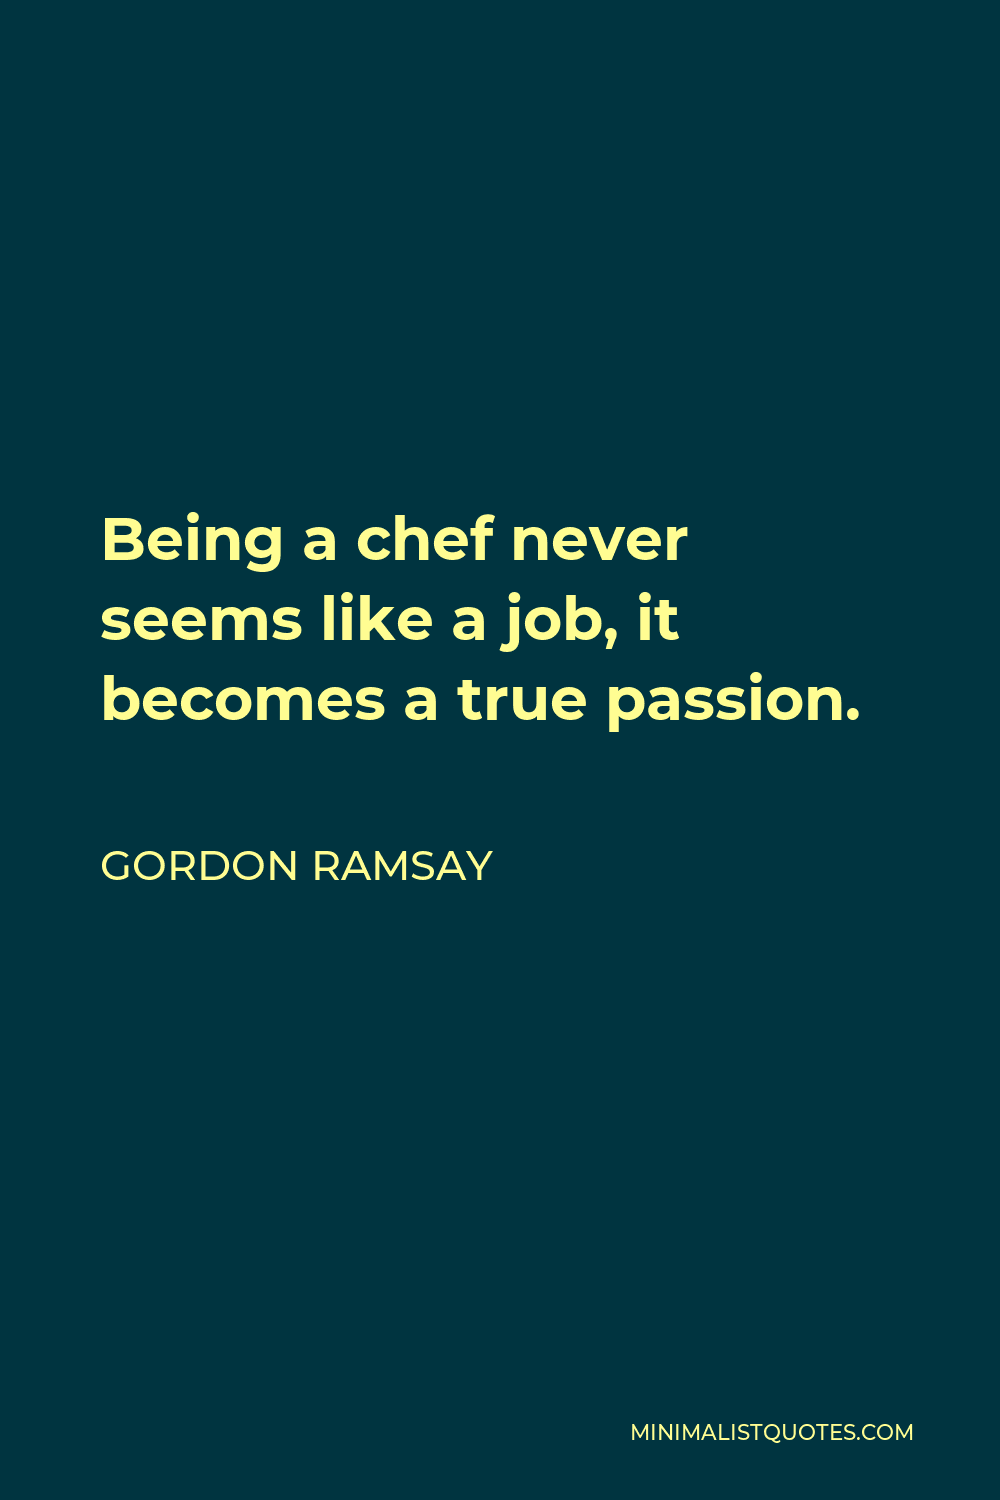 Gordon Ramsay Quote: Being a chef never seems like a job, it becomes a true  passion.